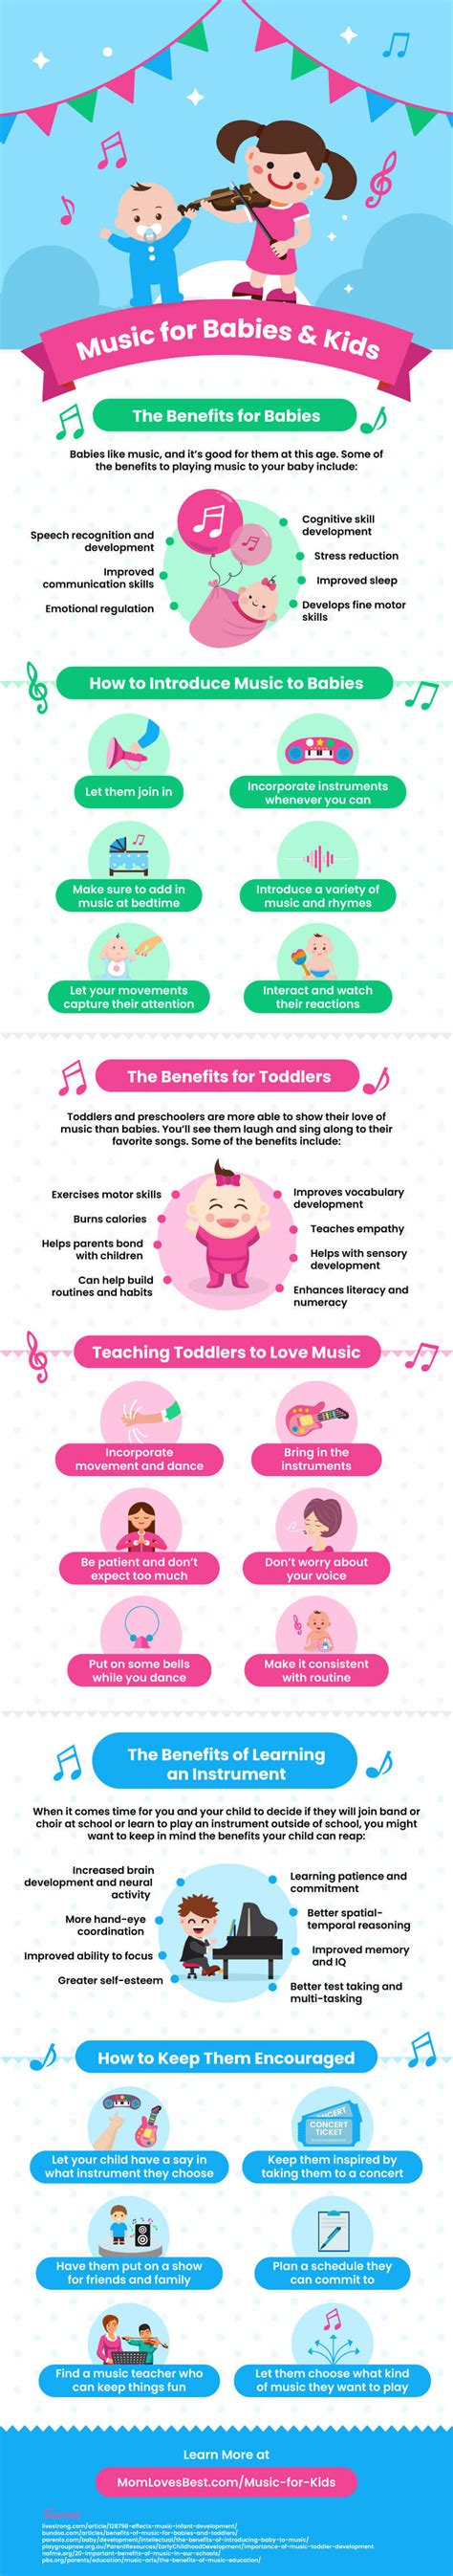 The structure and form of music can initiate security and order in distressed and disabled children. 10 Benefits of Children Learning a Musical Instrument